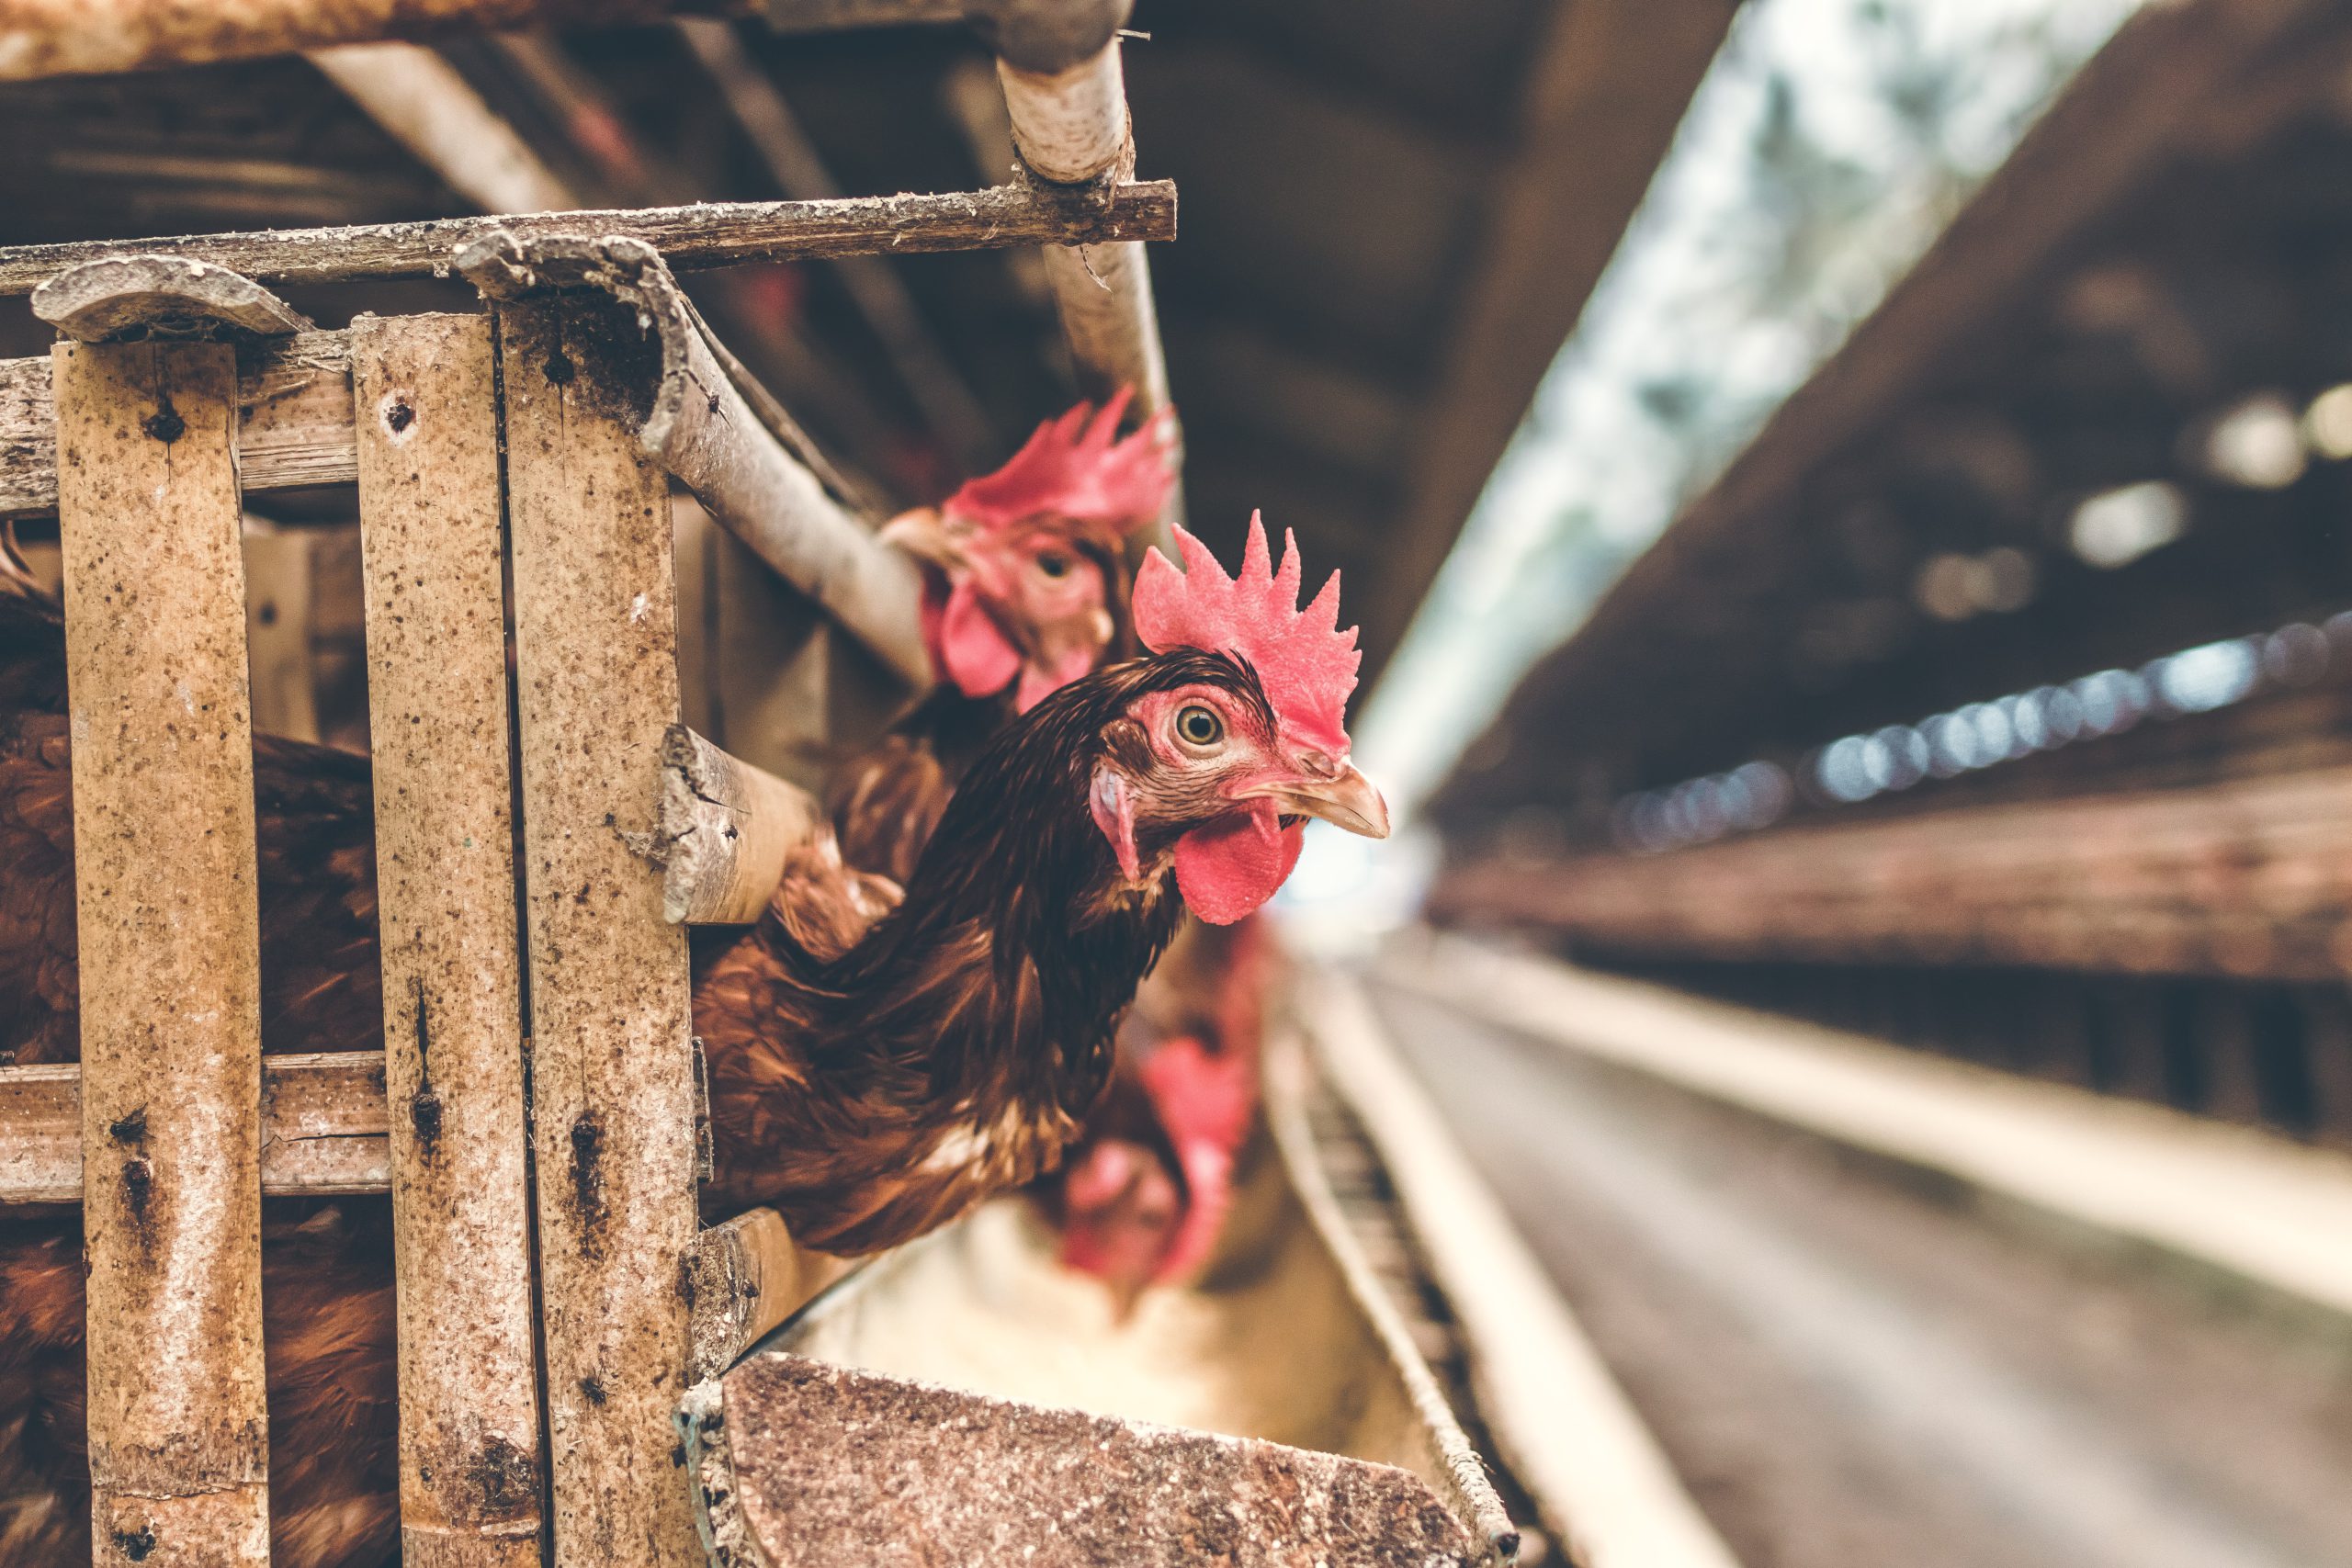 Baku uses data analytics and IoT hardware to improve poultry farming processes